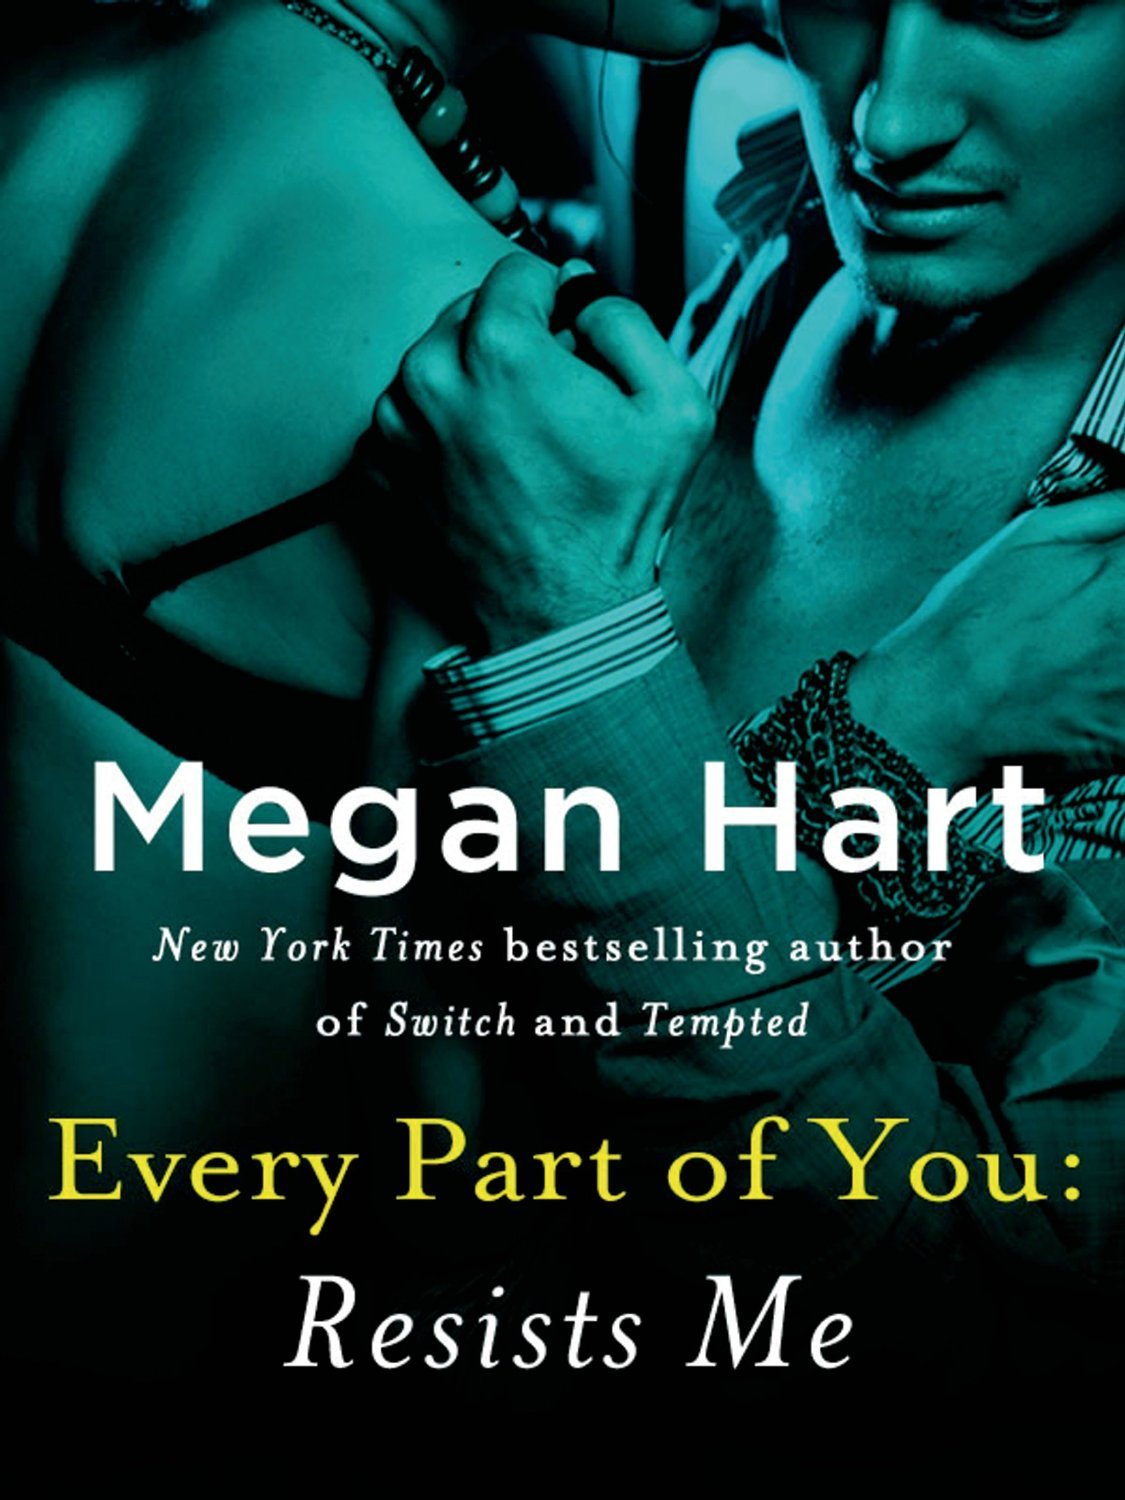 ARC Review: Every Part of You: Resists Me by Megan Hart